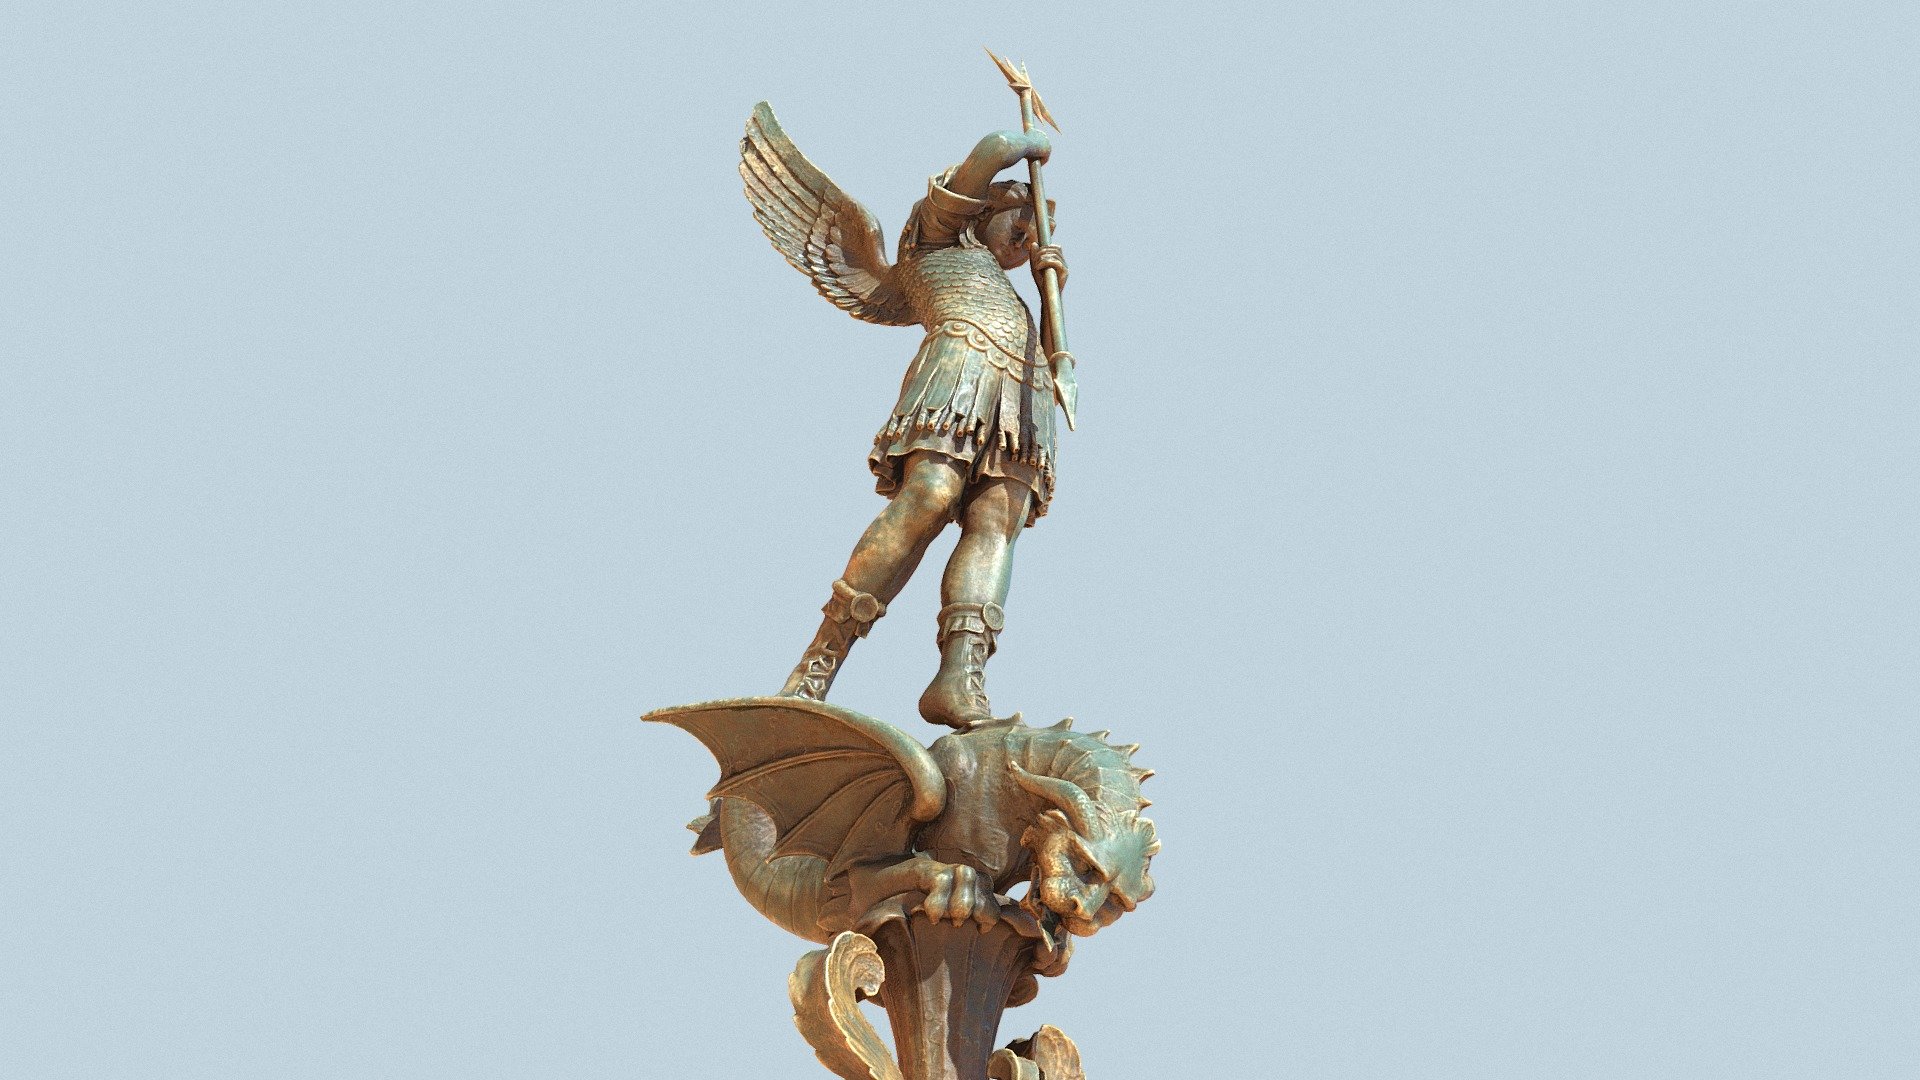 Archangel Saint Michael on top of Notre dame de Fourviere Lyon slaying Satan as a dragon ! 
In these times of confinement due to the coronaviru, I though it was a good time to finish this scan and see If this Archangel can help fight this pandemic 3d model